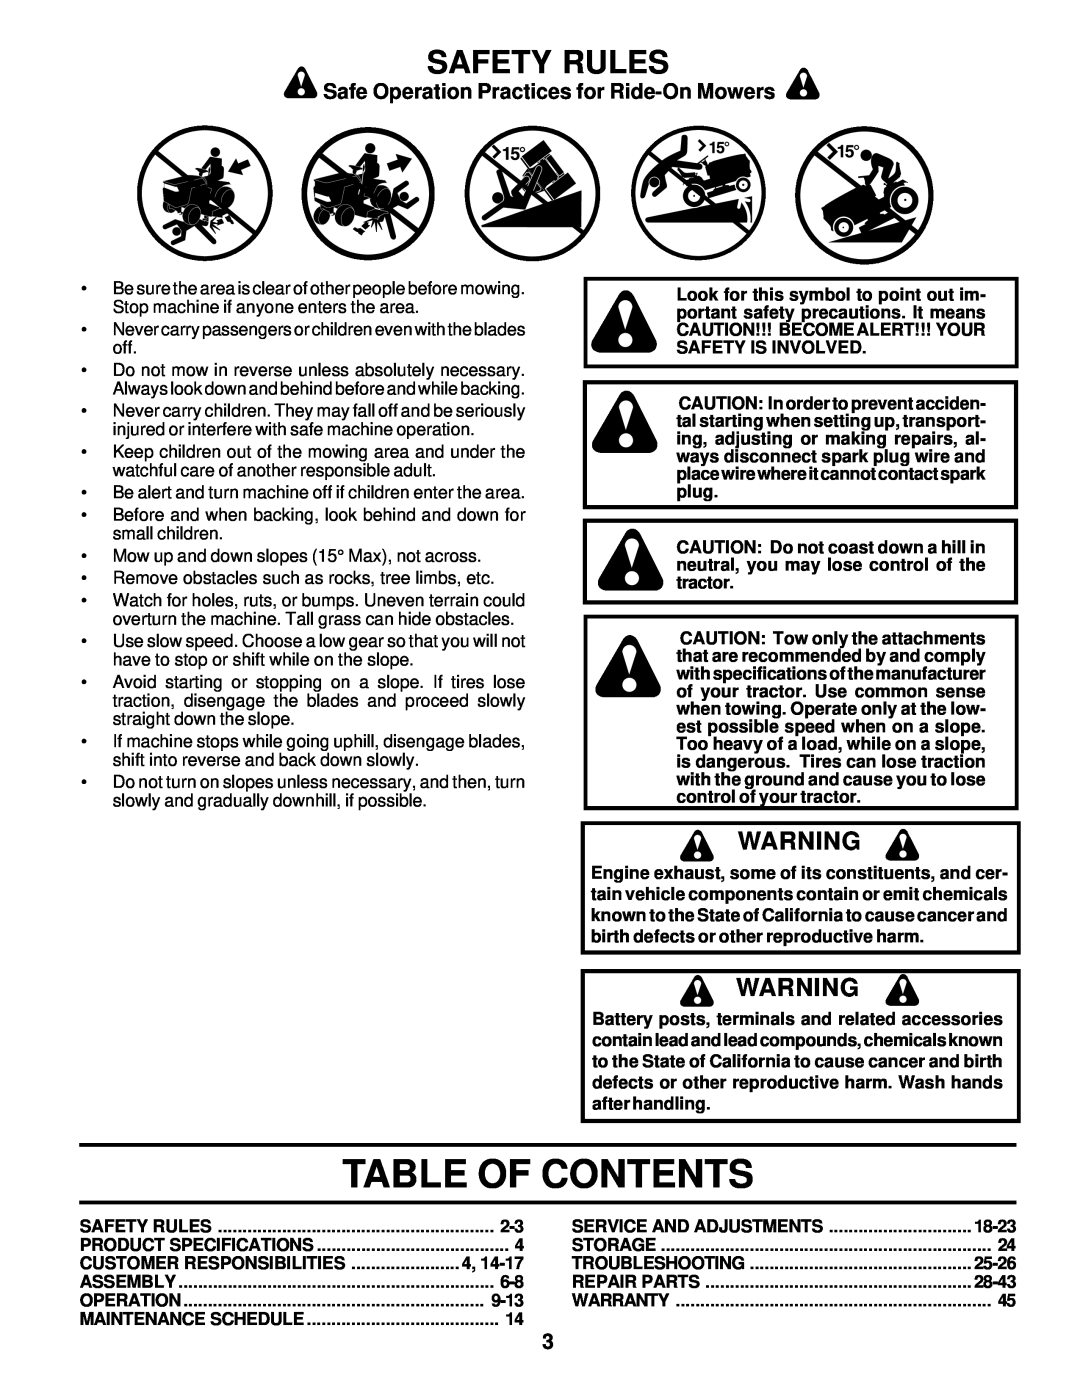 Poulan PR18542STC Table Of Contents, Safety Rules, Safe Operation Practices for Ride-On Mowers, 9-13, 18-23, 25-26, 28-43 